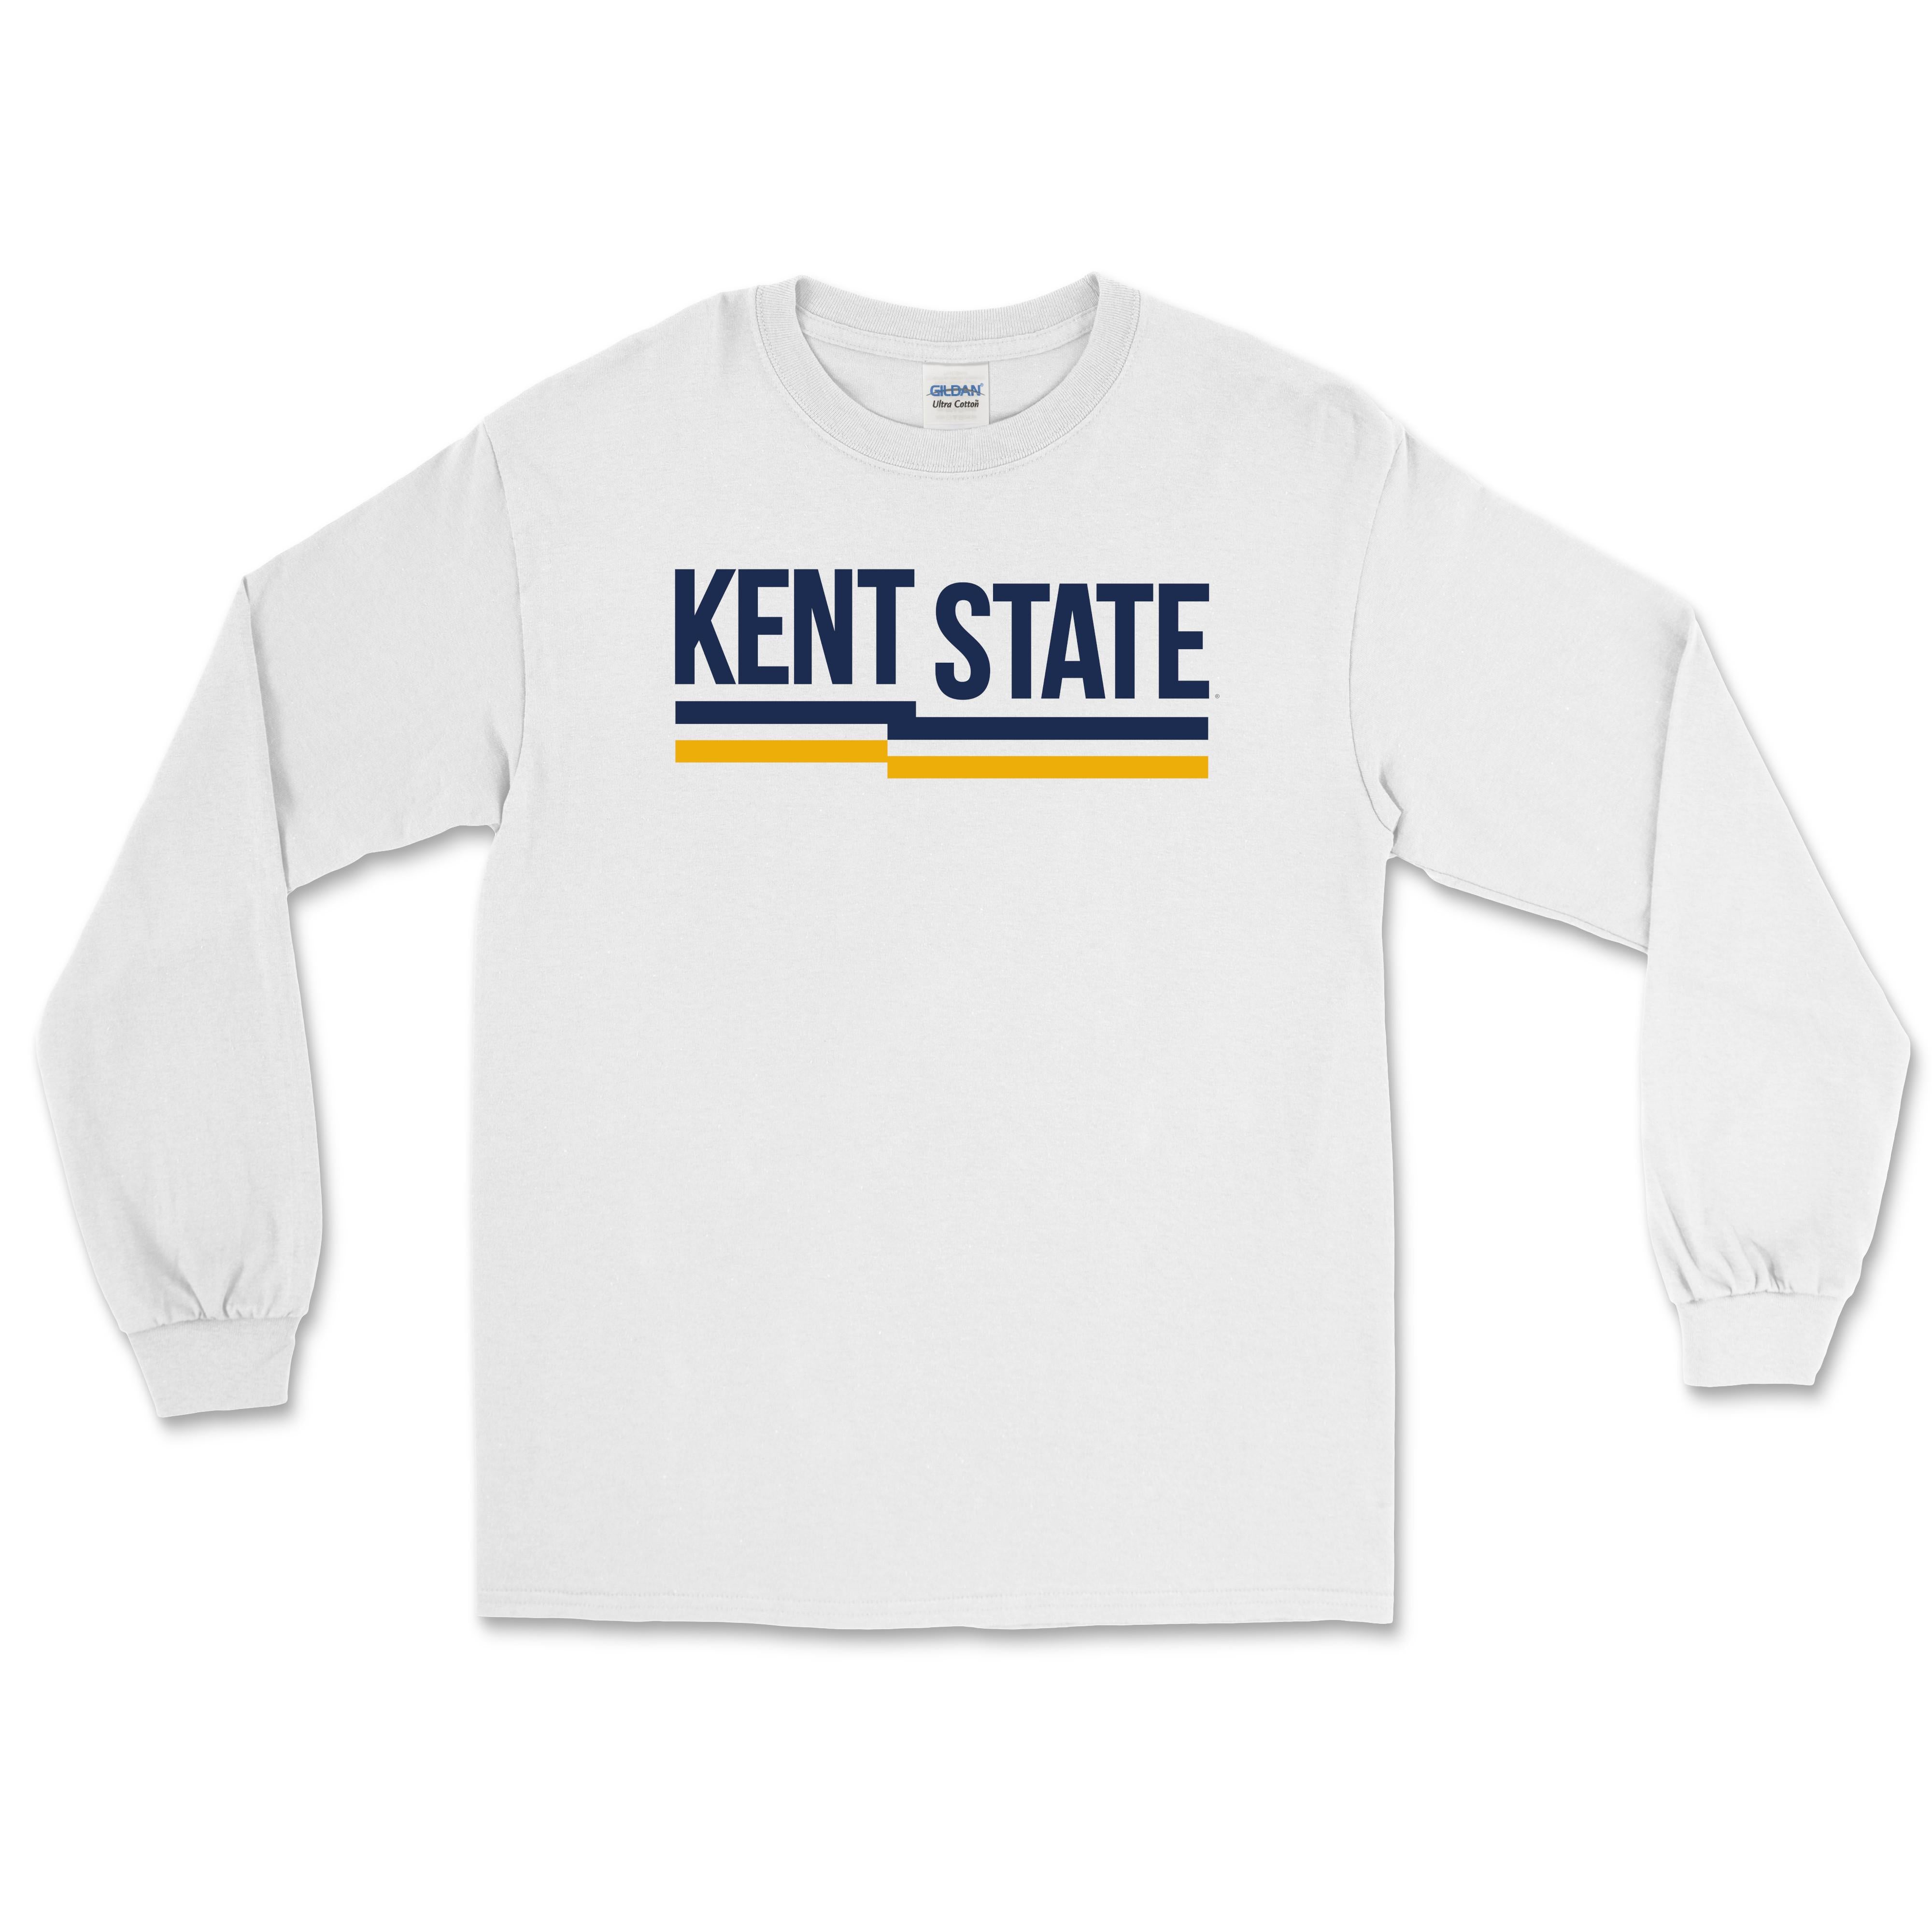 Kent State White Over Line Sleeve T-Shirt